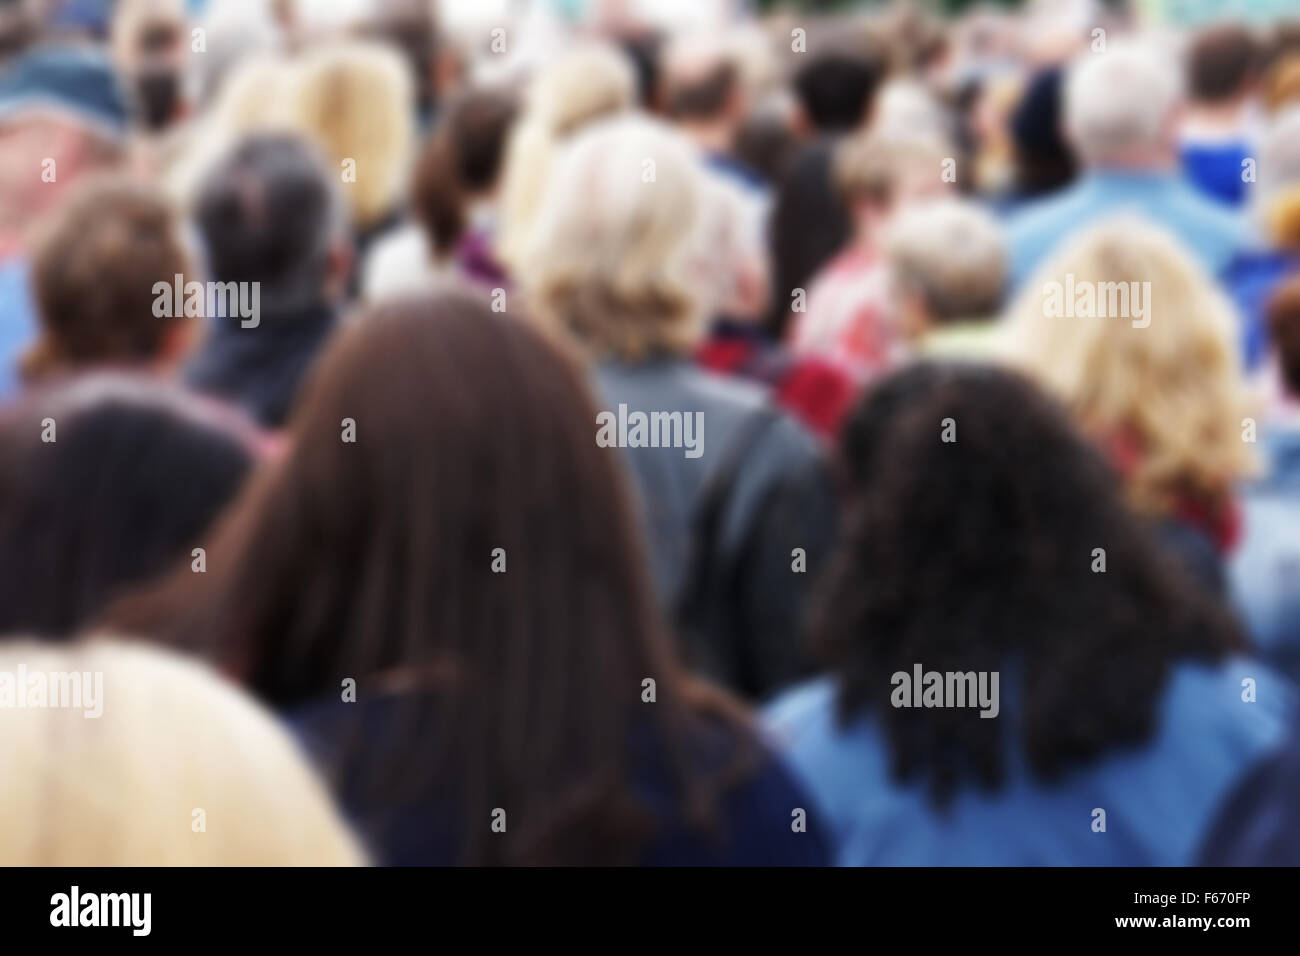 blurred crowd of people Stock Photo